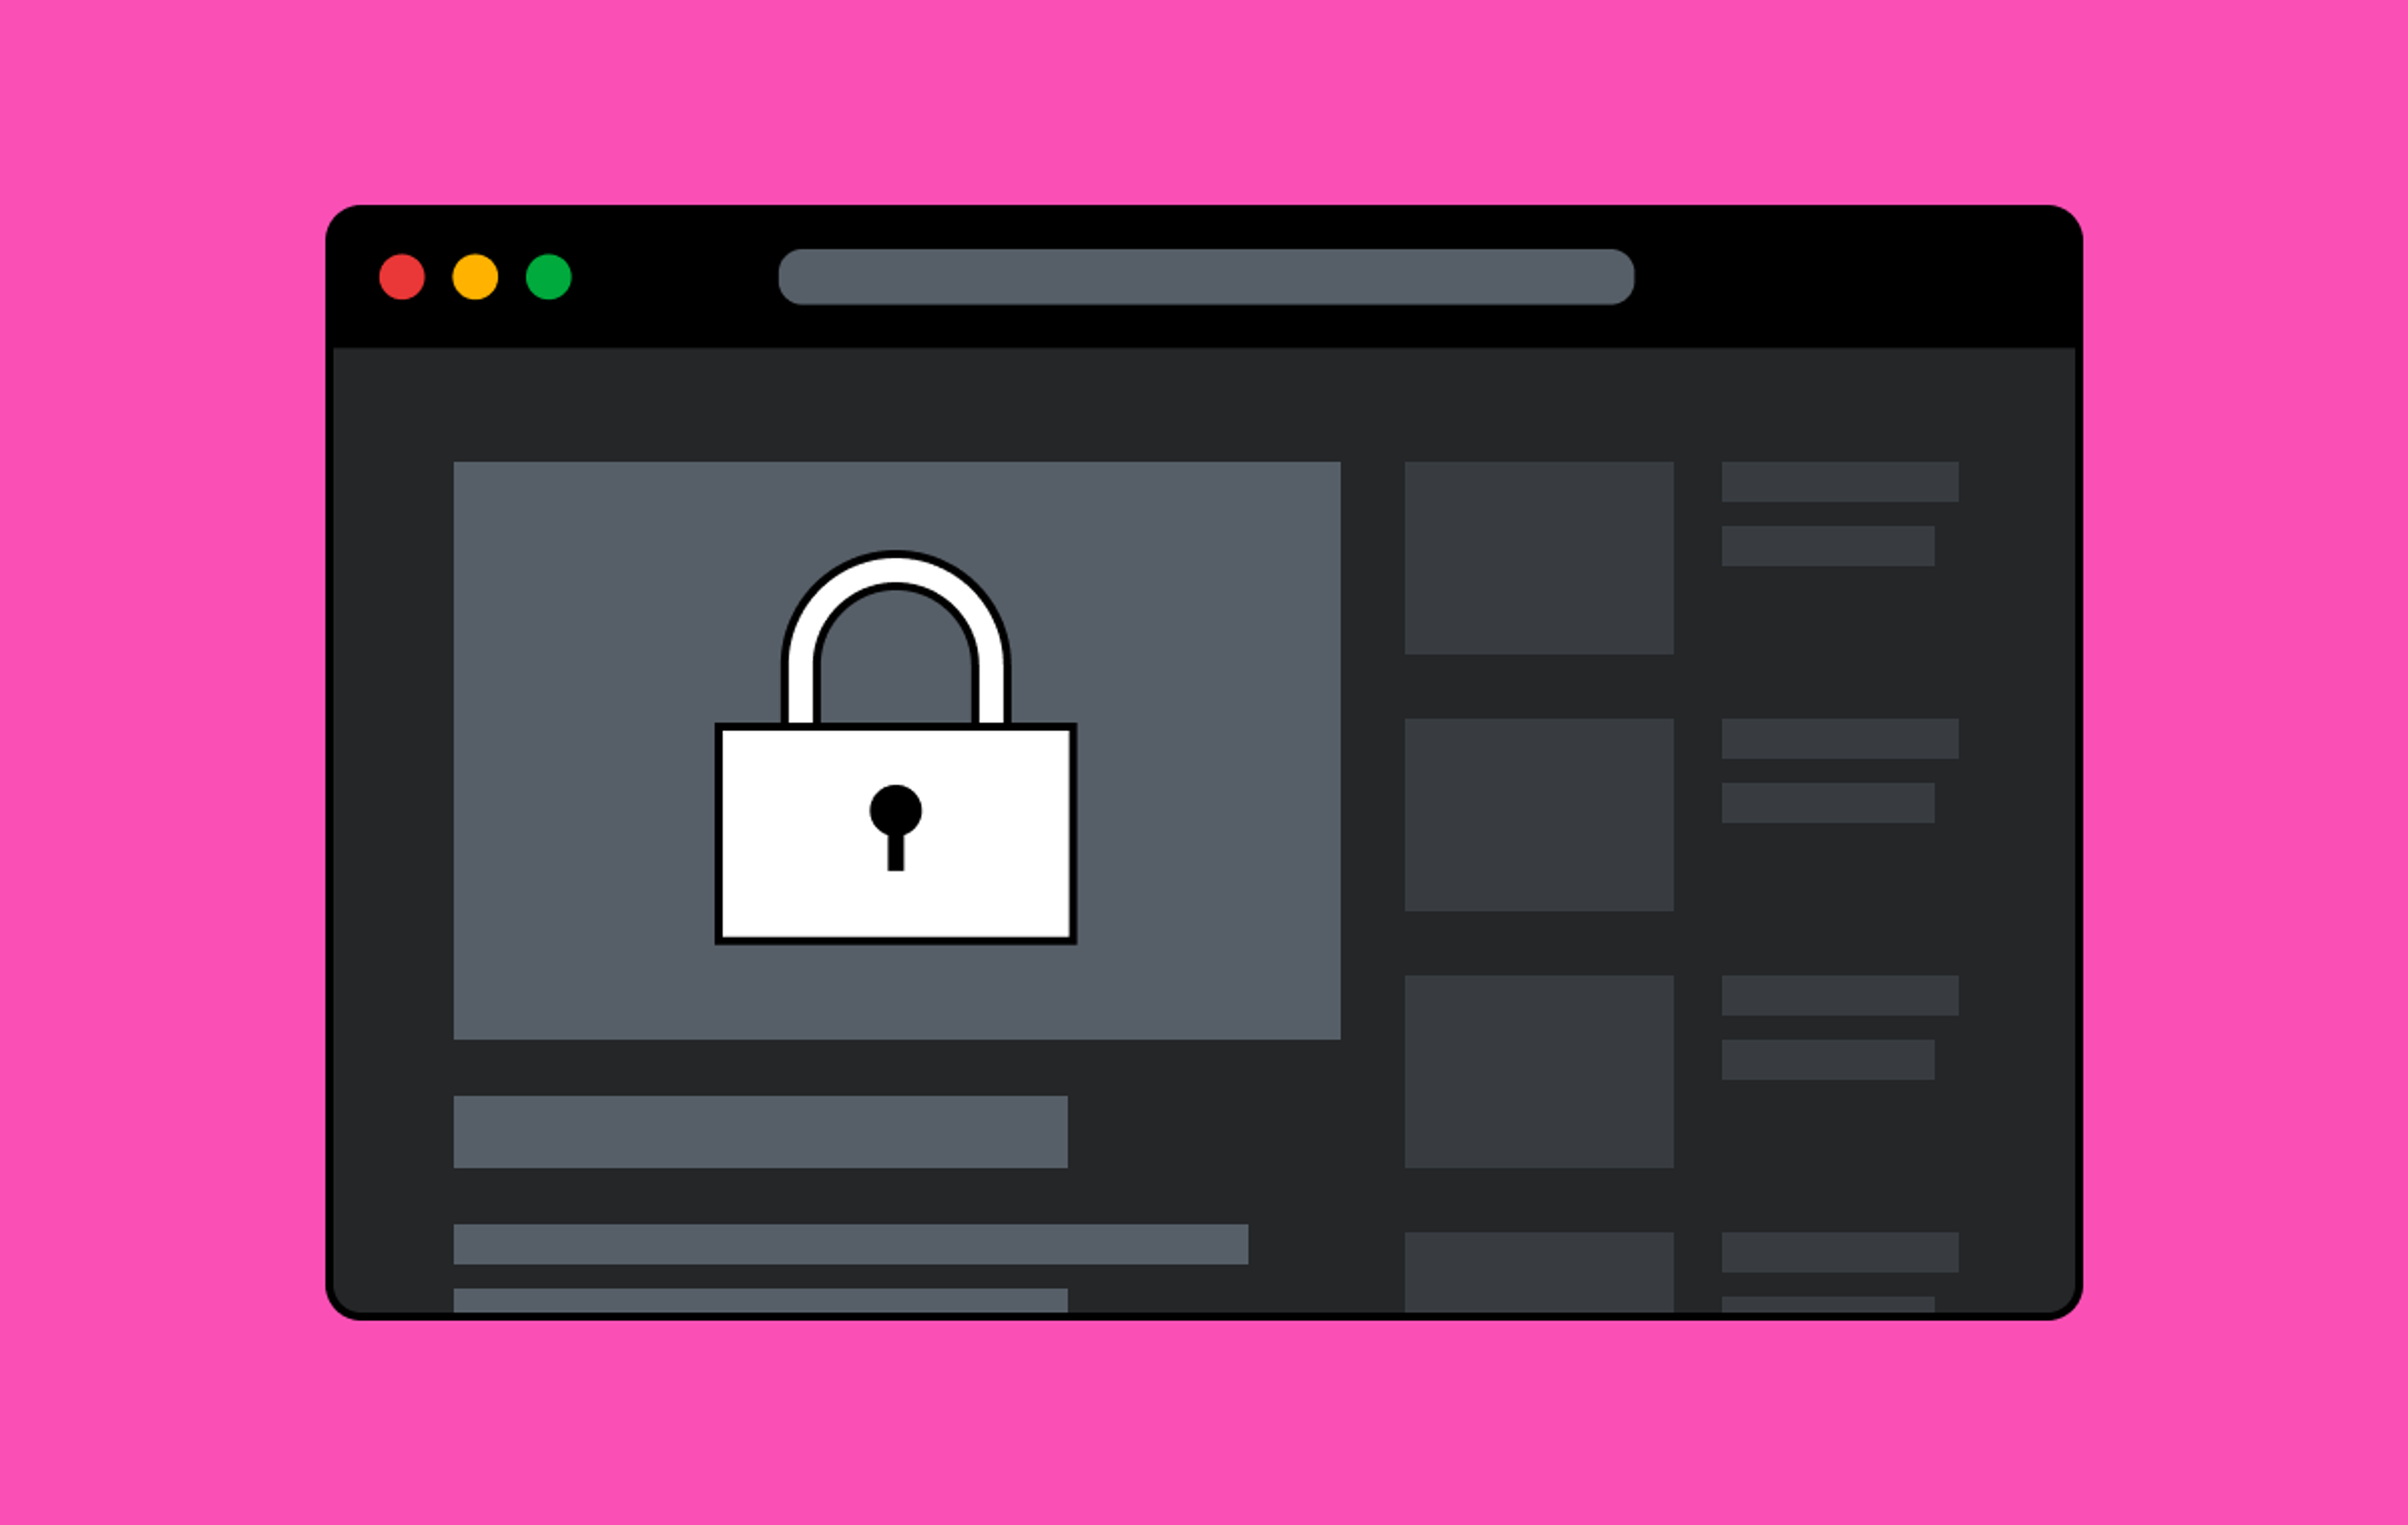 On a pink background, a padlock overlaid on a screenshot of a video streaming platform.